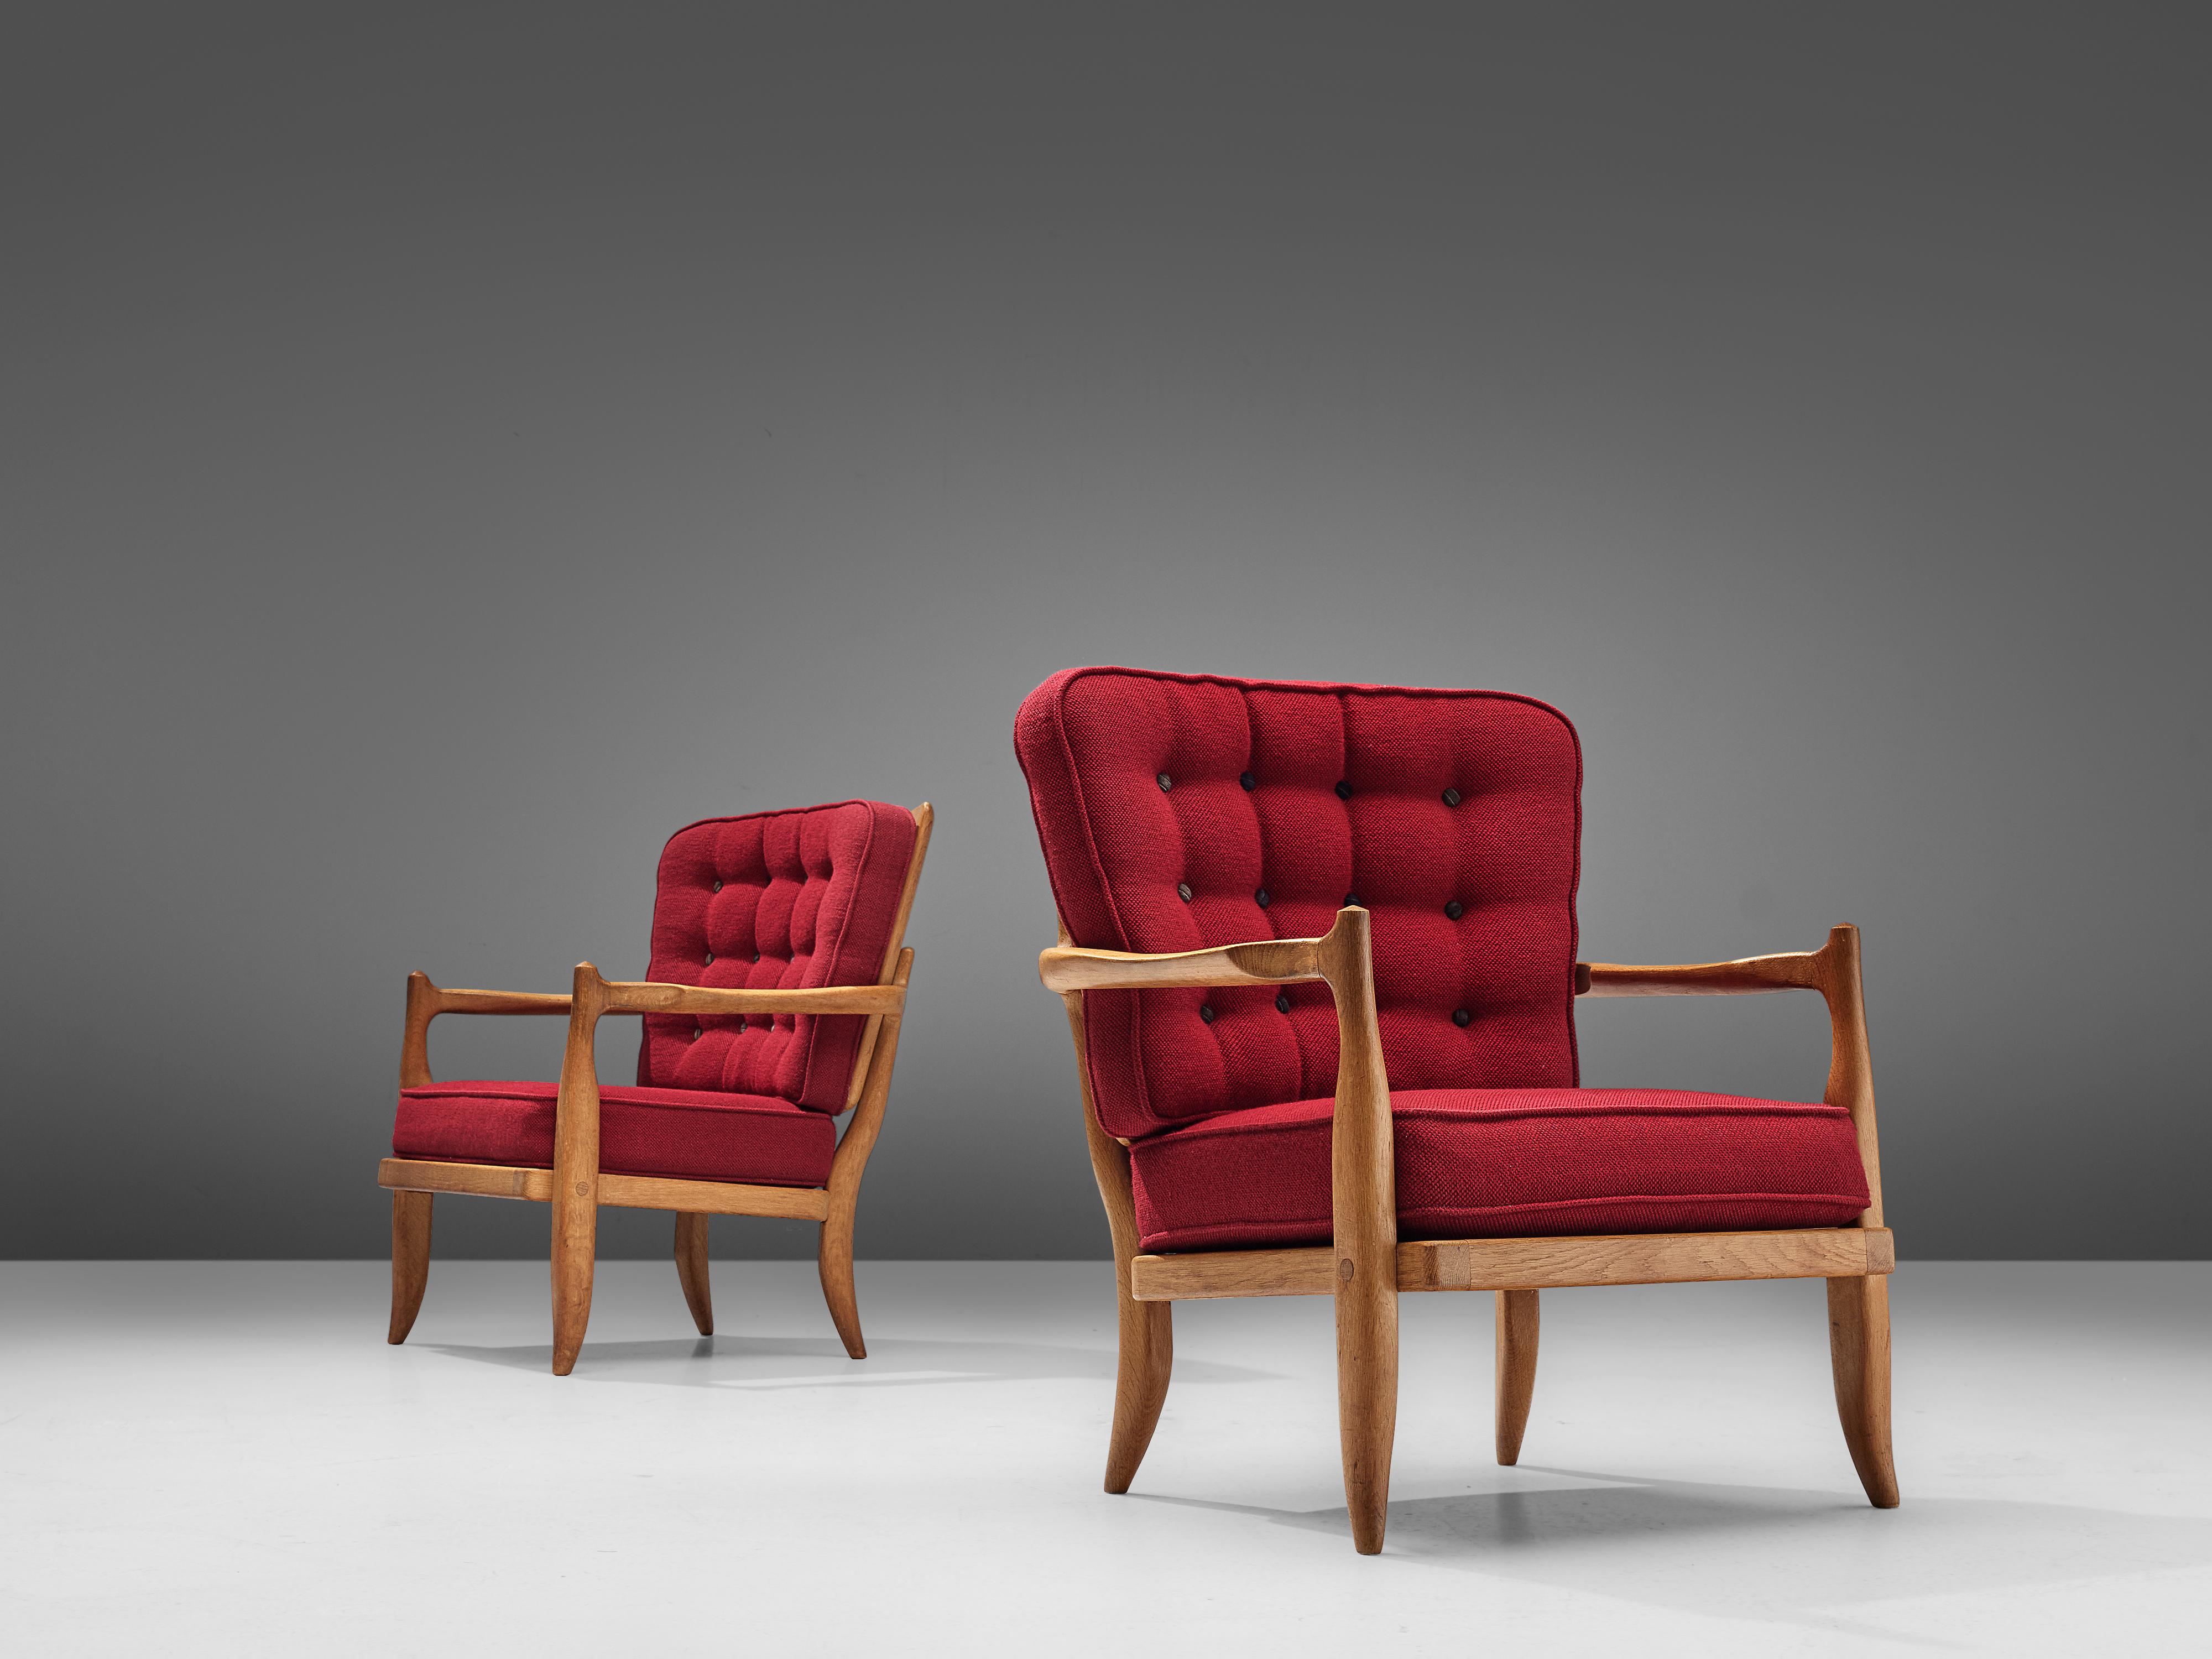 Guillerme and Chambron, set of two easy chairs, model 'José', oak, red upholstery, France, 1950s

Characteristic pair of lounge chairs by French designer duo Guillerme et Chambron. The seating as well as the backrest are made of comfortable